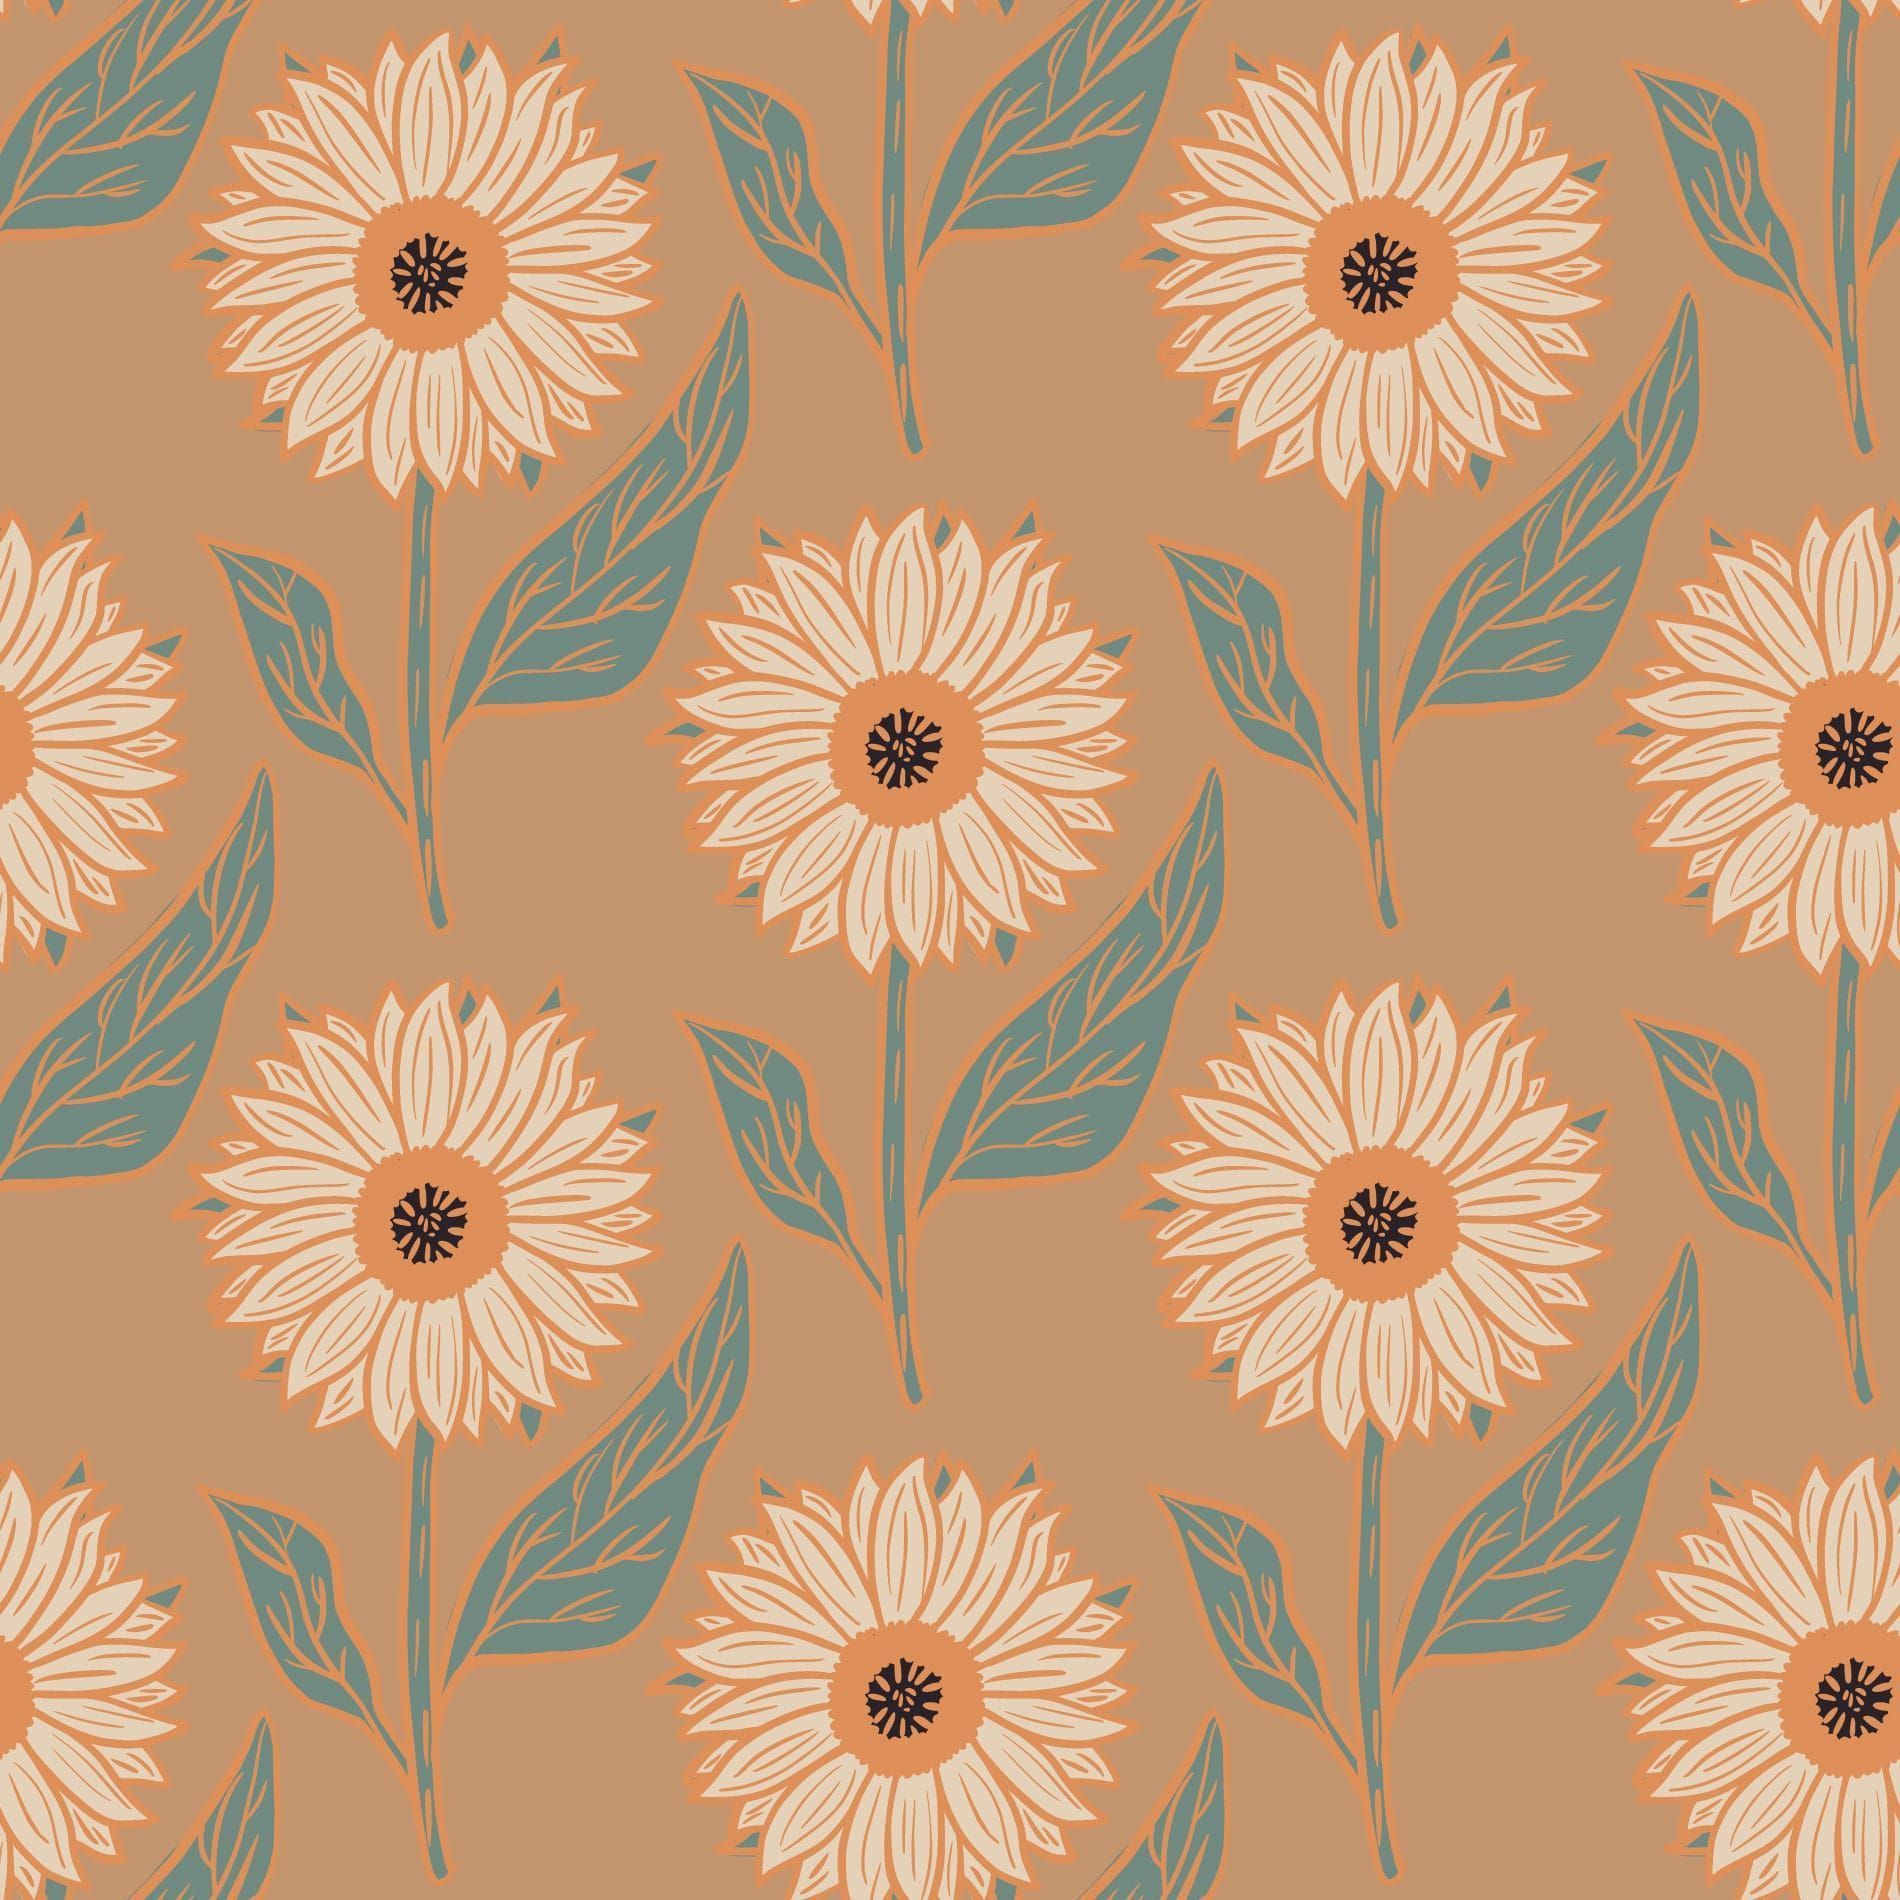 A repeating pattern of white sunflowers - Flower